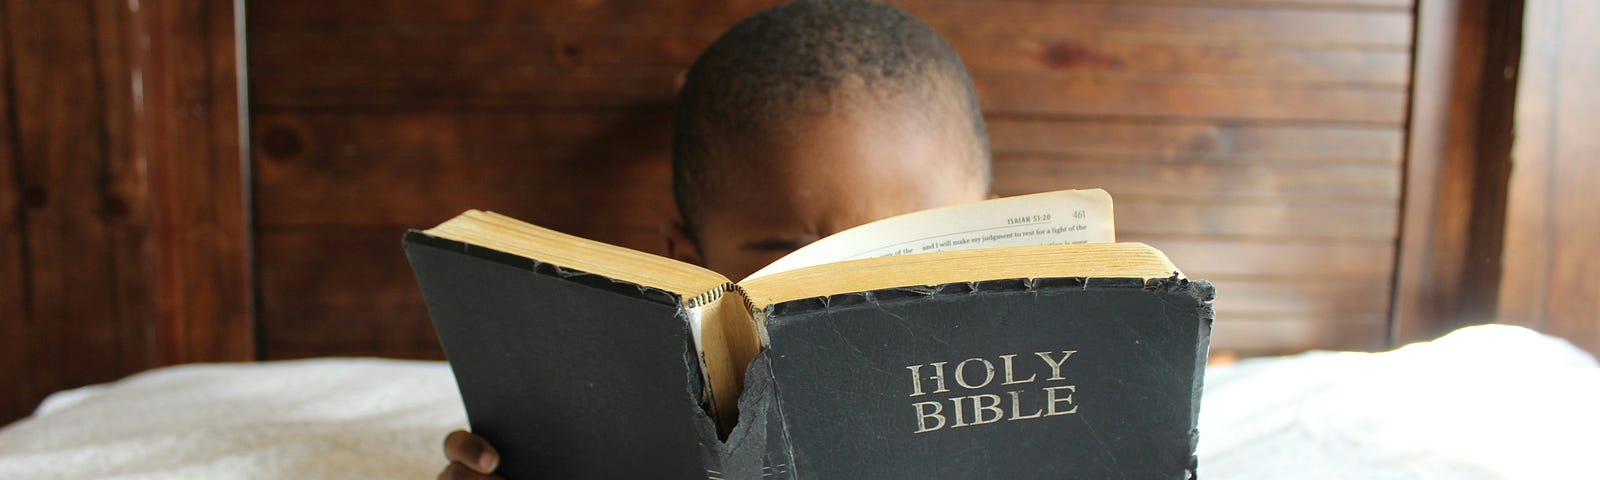 Kids sitting in bed reading the Bible